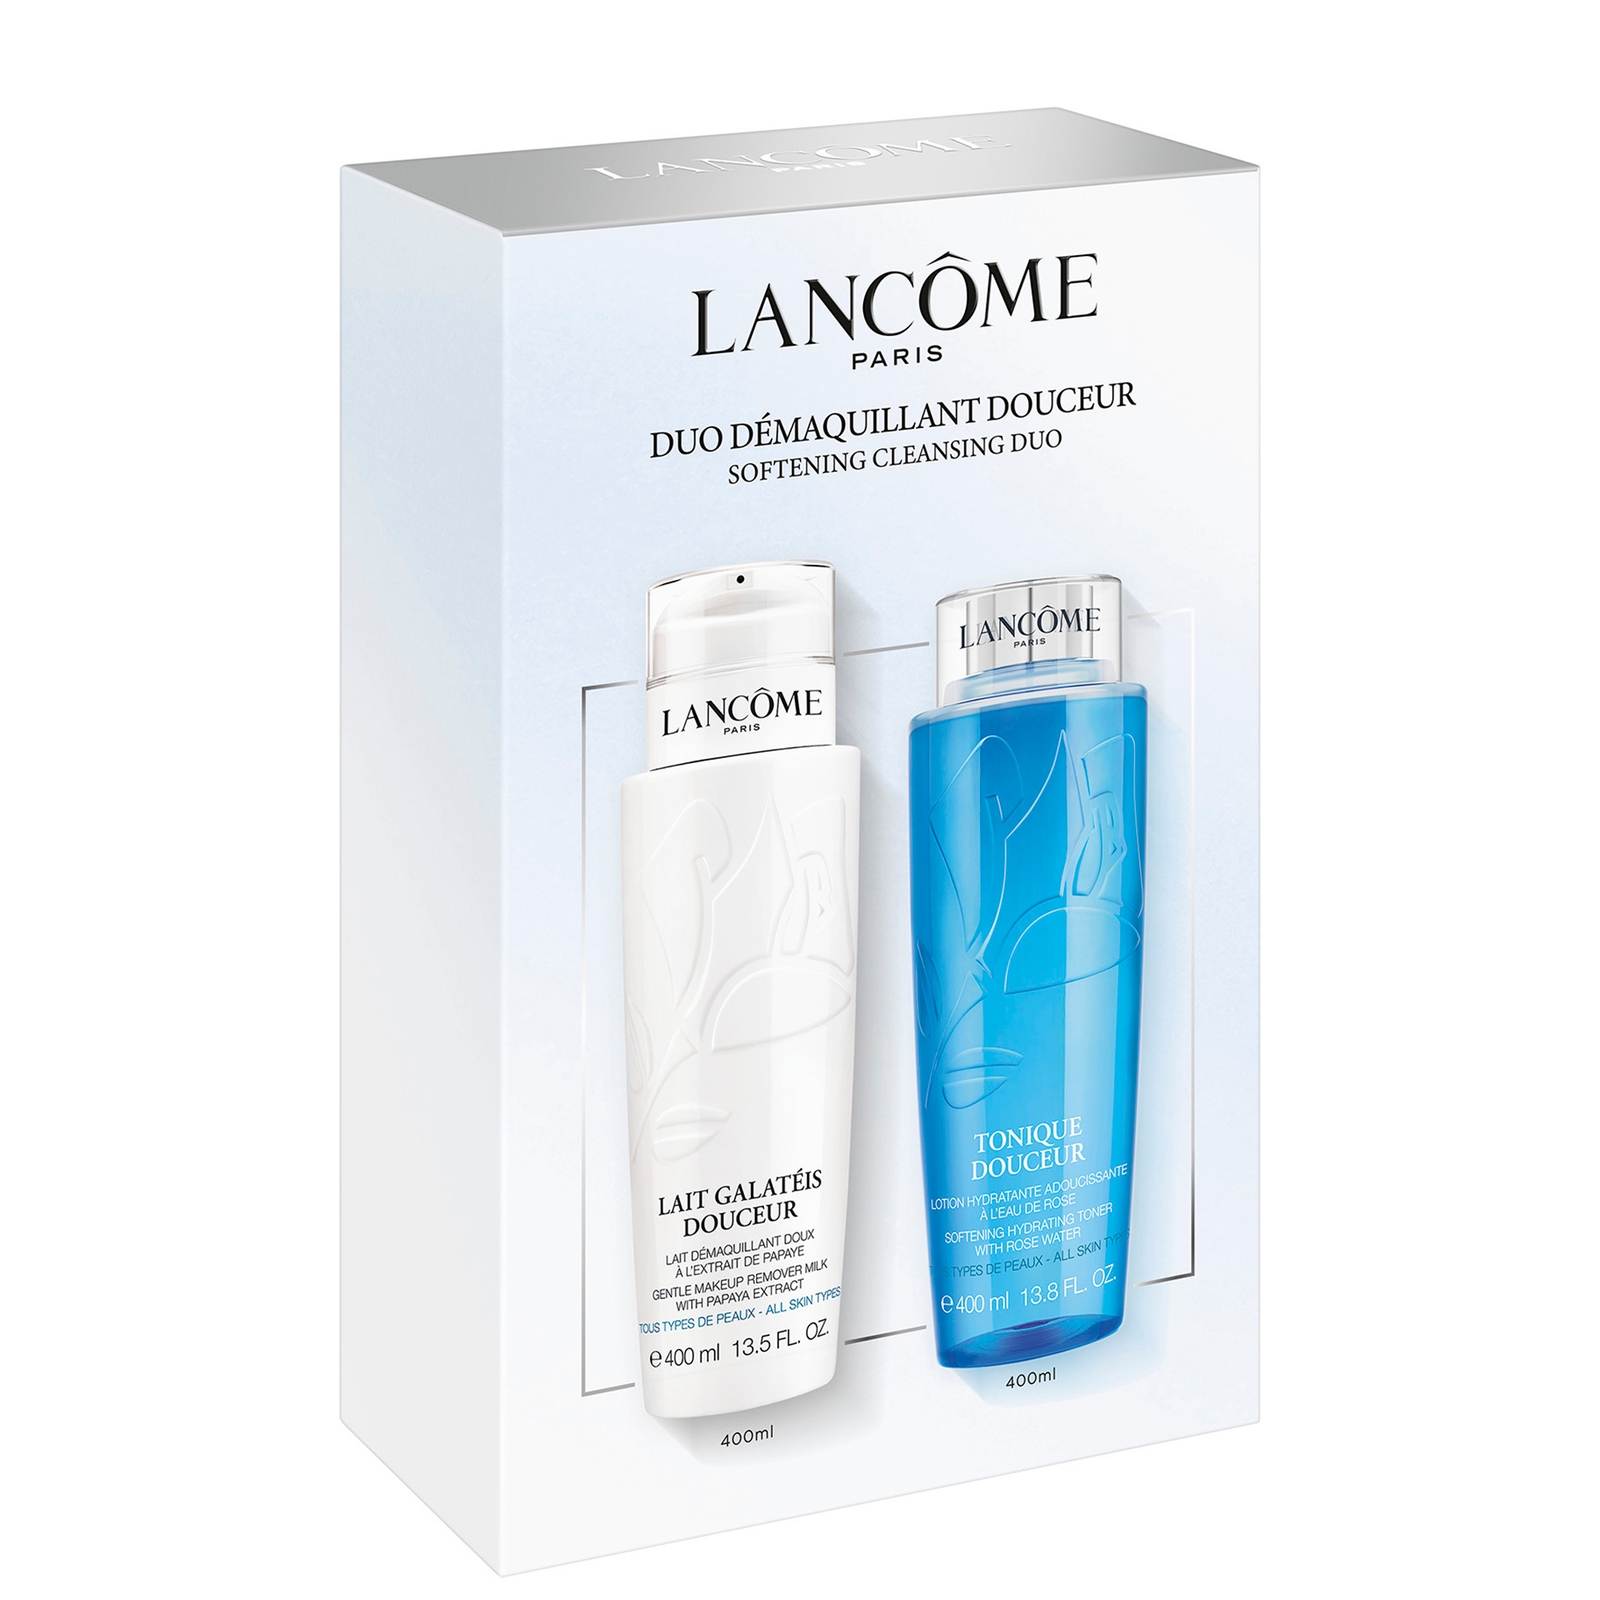 Lancome Jumbo Douceur Cleanser Duo 400ml Gift Set